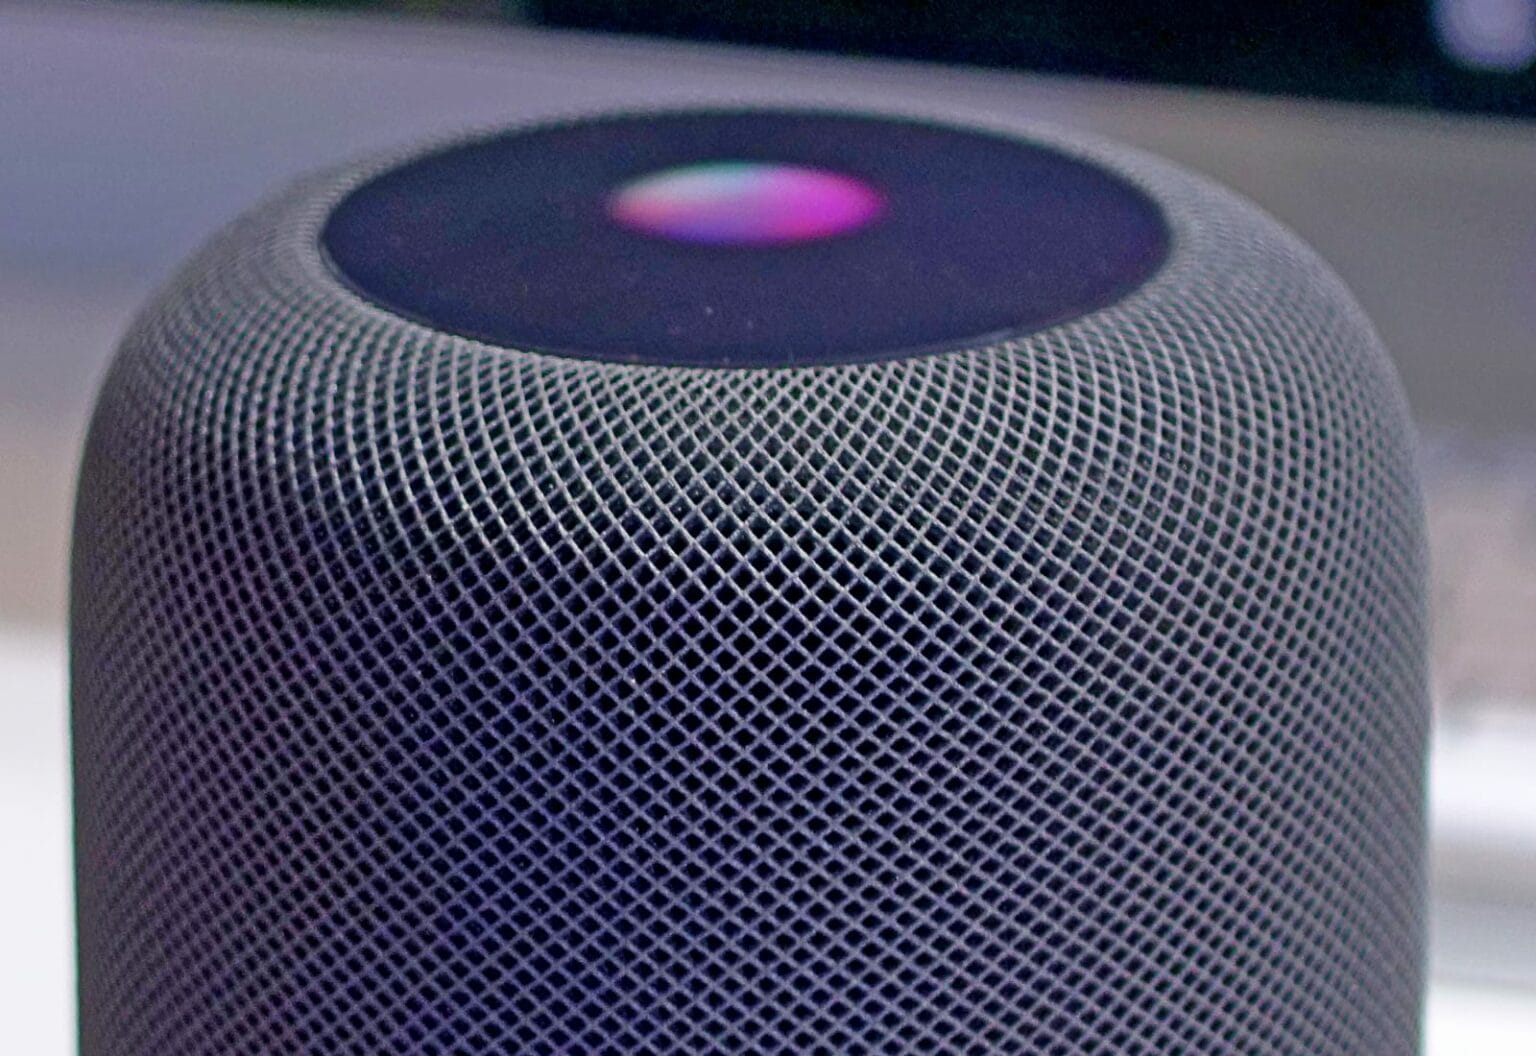 The big HomePod could be back soon. But how pricey and how functional will it be?